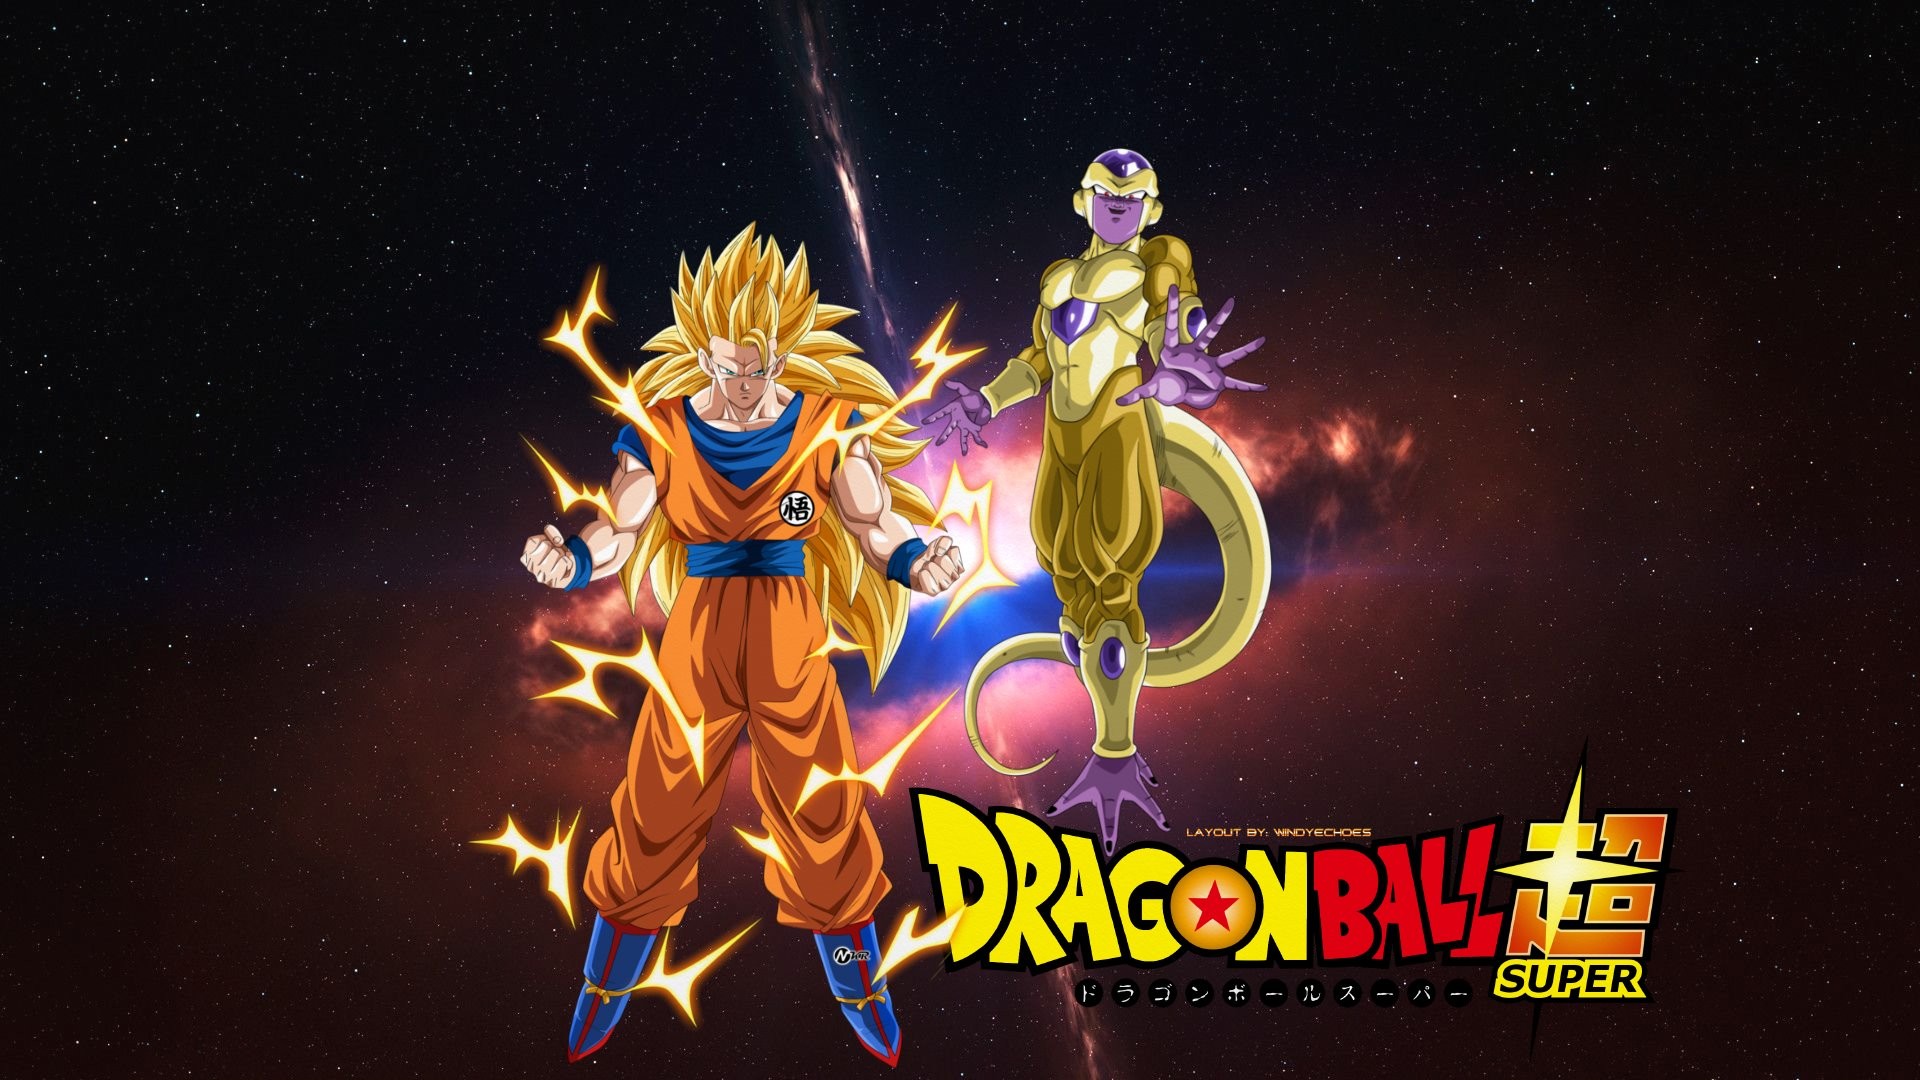 Golden Frieza And SSJ 3 Goku – Tournament Of Power by WindyEchoes